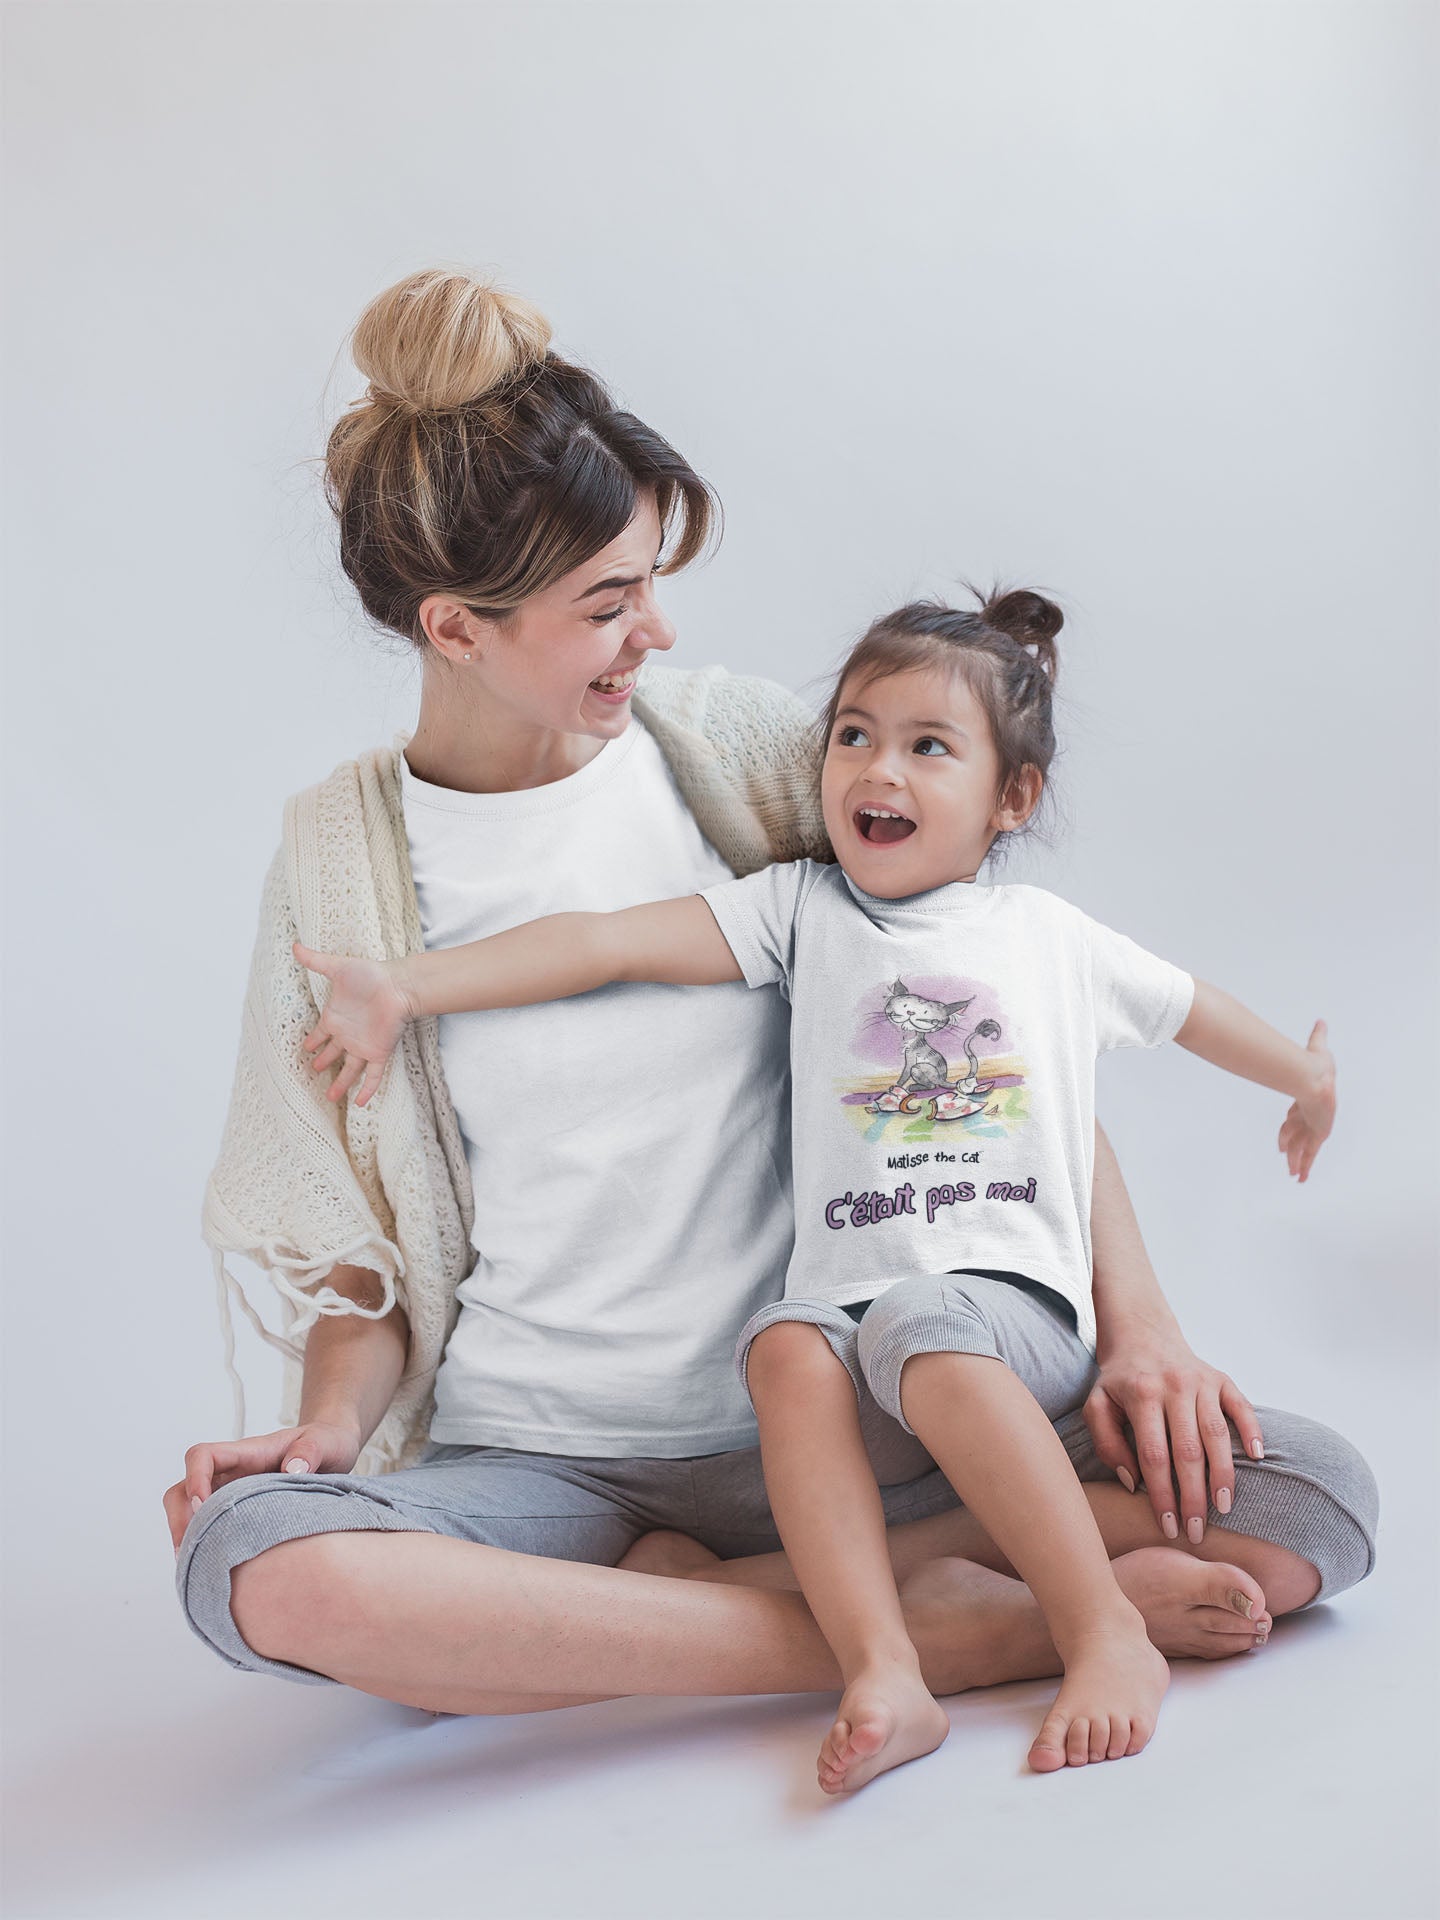 A white official, Matisse the Cat children’s t-shirt with the slogan “c'était pas moi” (It wasn’t me) featuring Matisse sitting on a vibrant carpet, his innocent gaze fixed upon a broken vase. Worn by  a young girl sitting with her mum having fun.